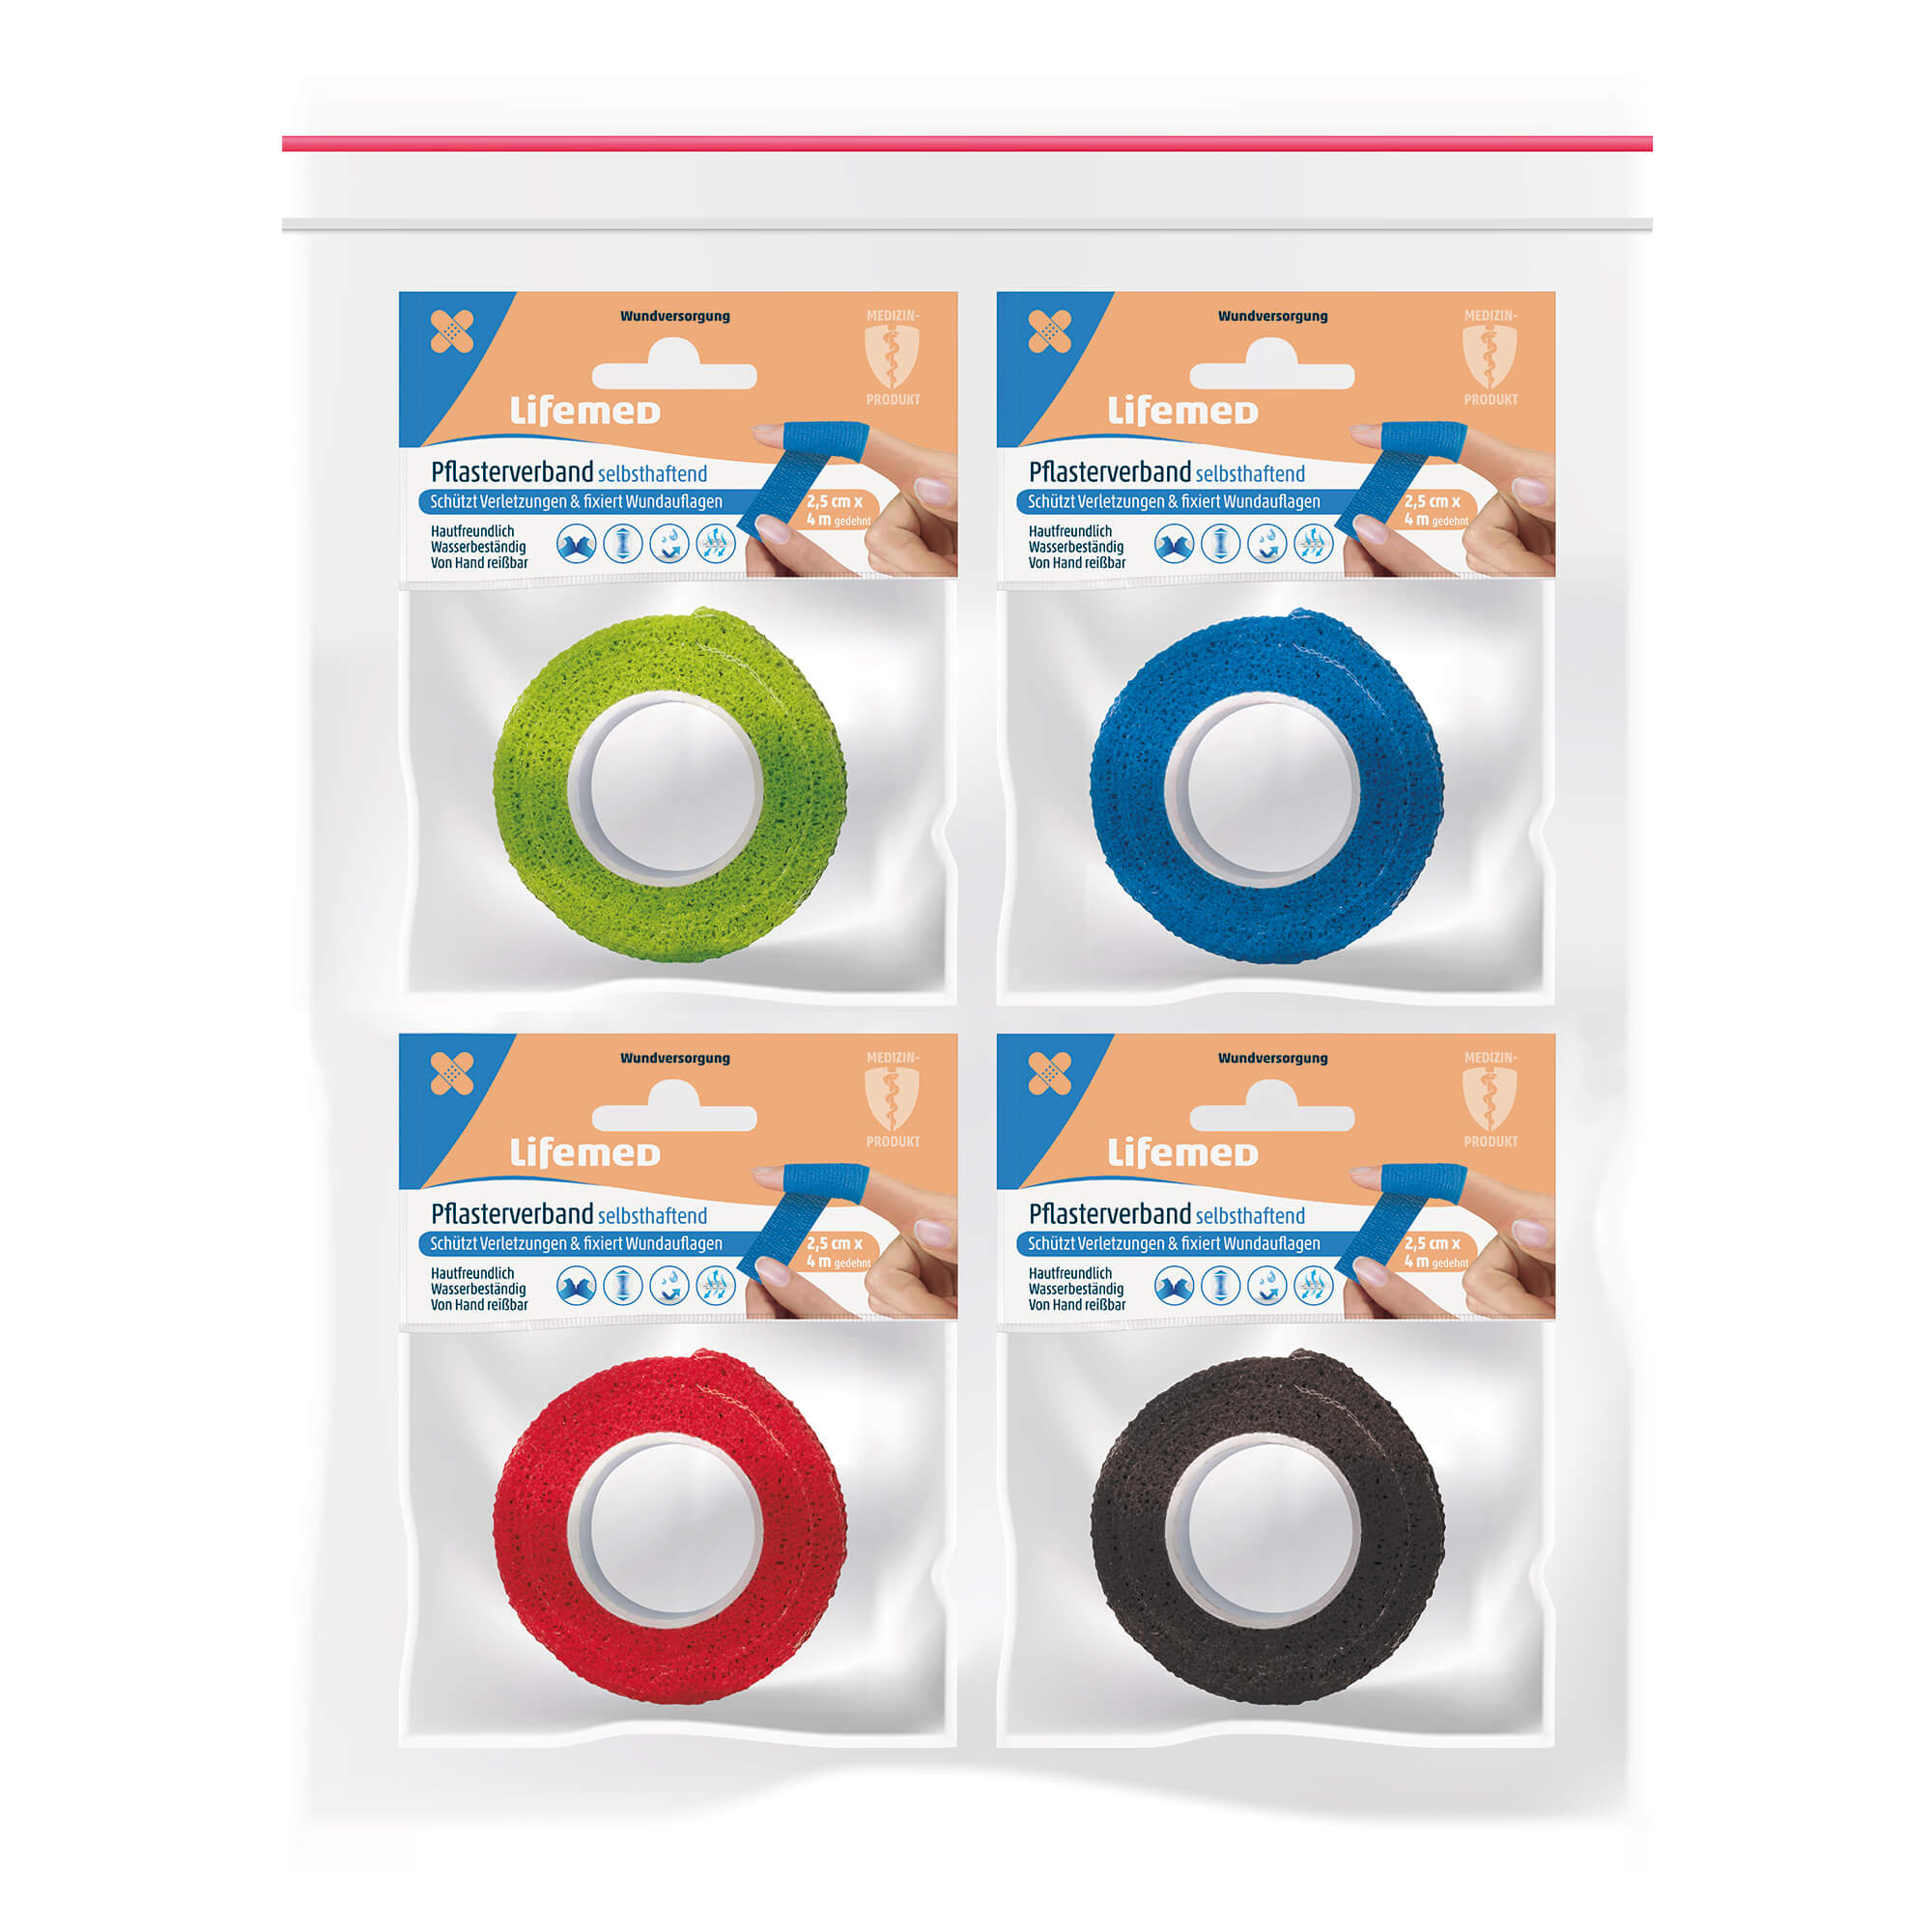 Plaster bandage, self-adhesive, 4 colors, from Lifemed®, 4 pieces